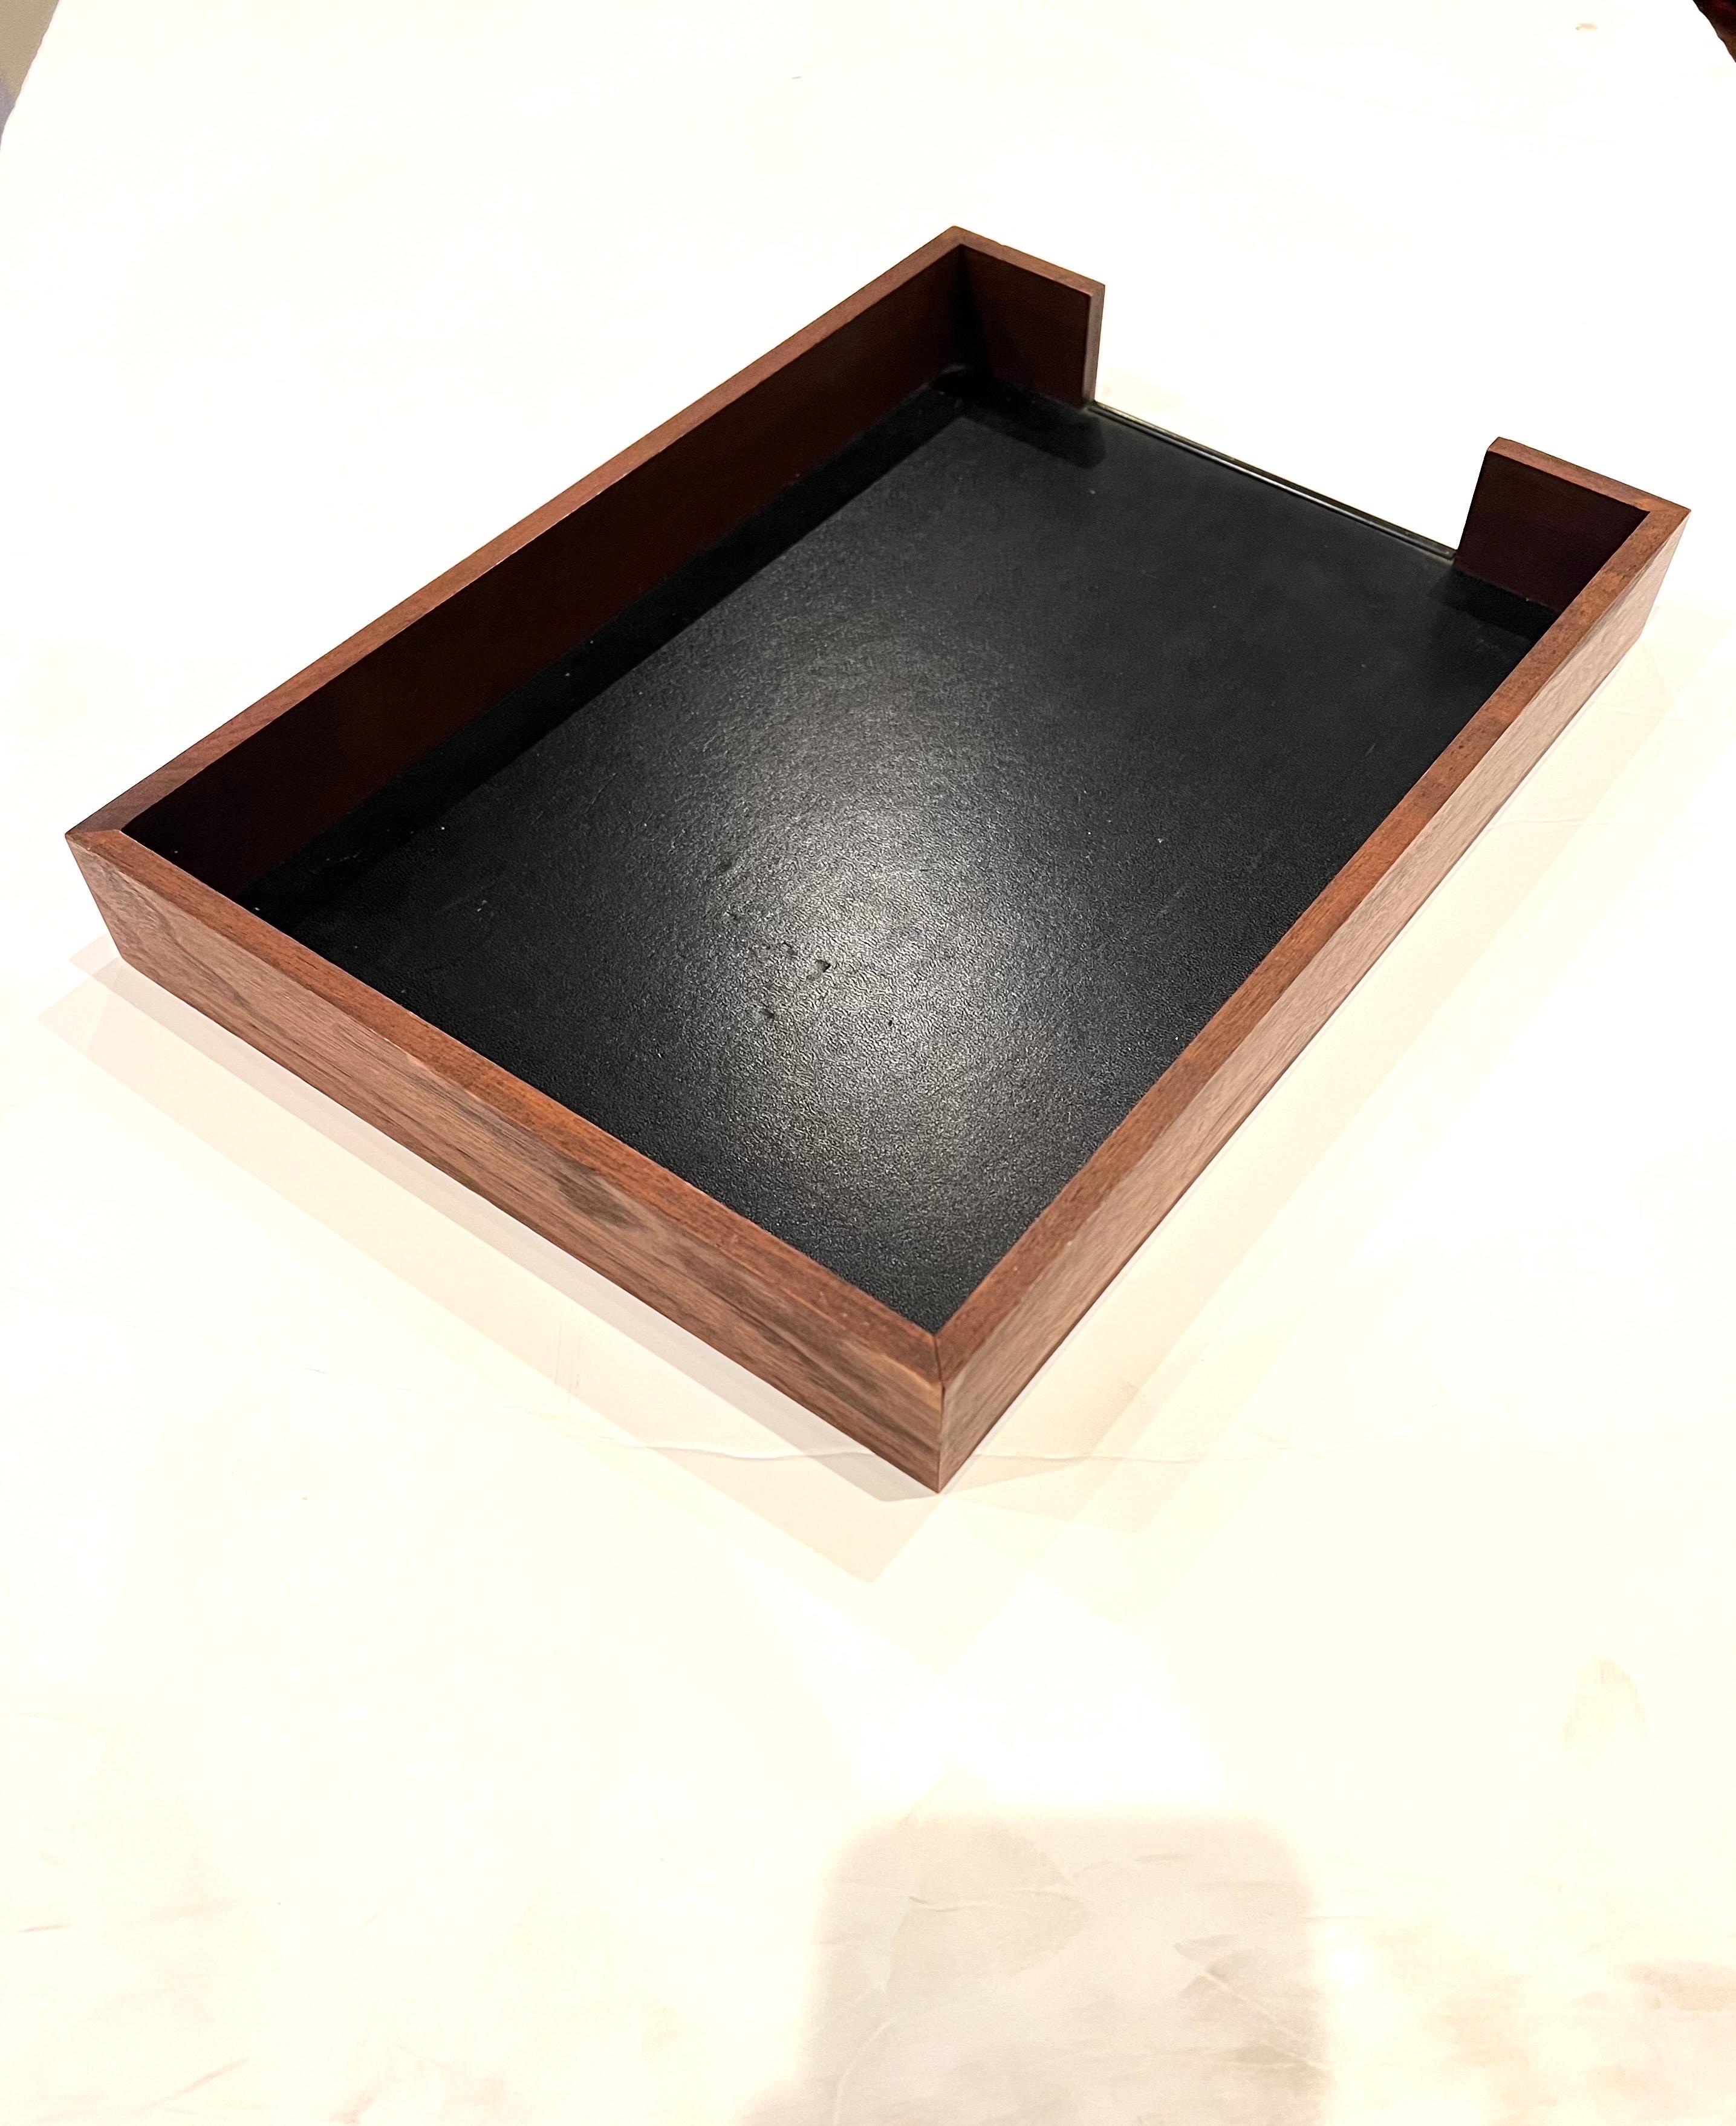 Single letter desk tray with solid walnut walls and leather insert, circa 1970s freshly refinished, Very nice accent to any executives desk! California design.
  